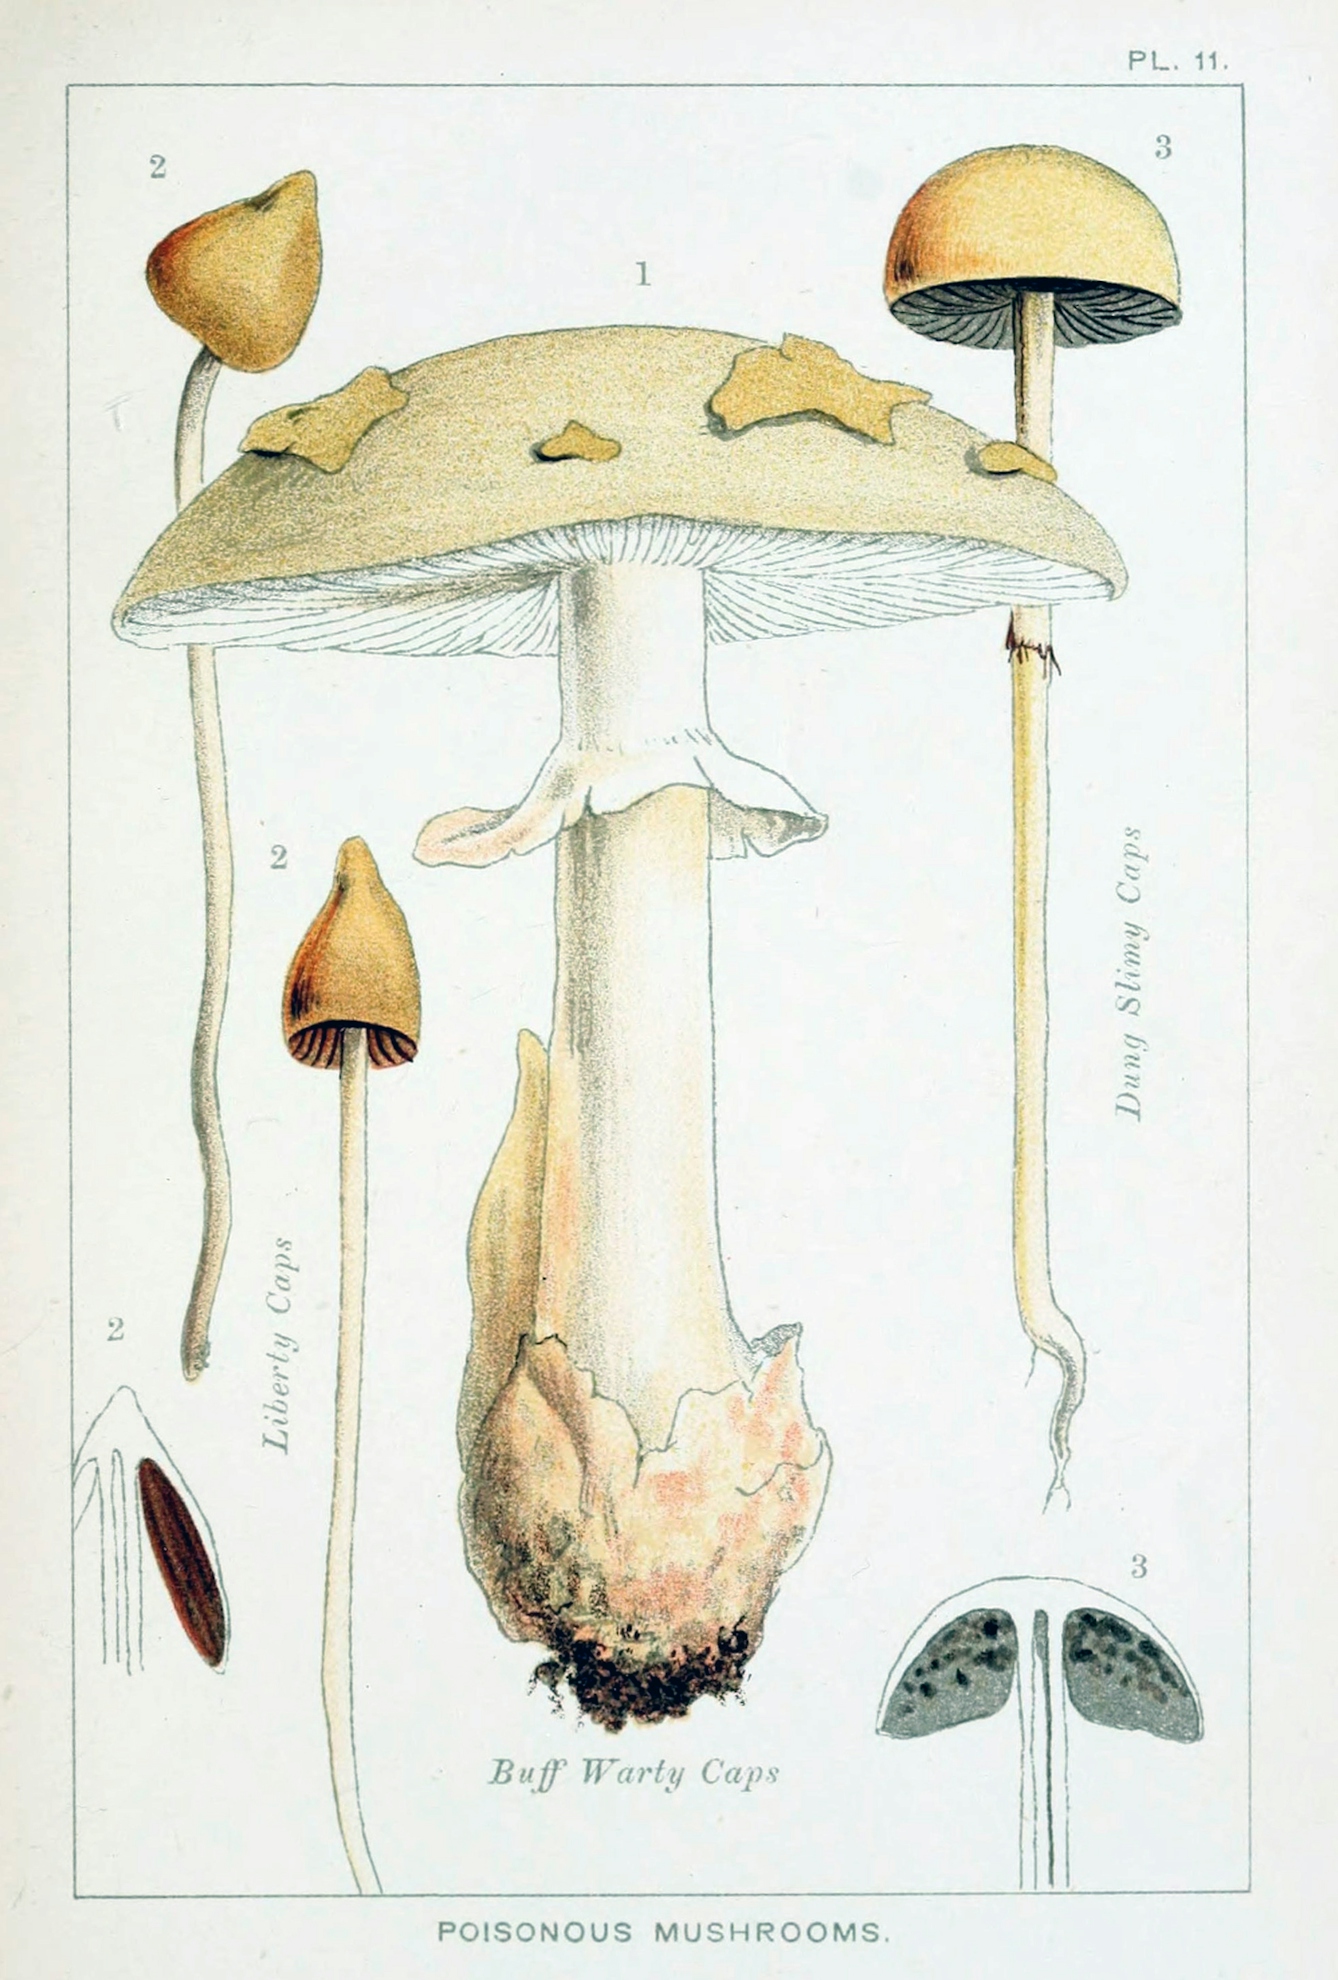 Illustration page. Coloured plate depicts three varieties of poisonous mushrooms: Liberty Caps, Buff Warty Caps, and Dung Slimey Caps. All are yellow-white mushrooms with a slender stalk.